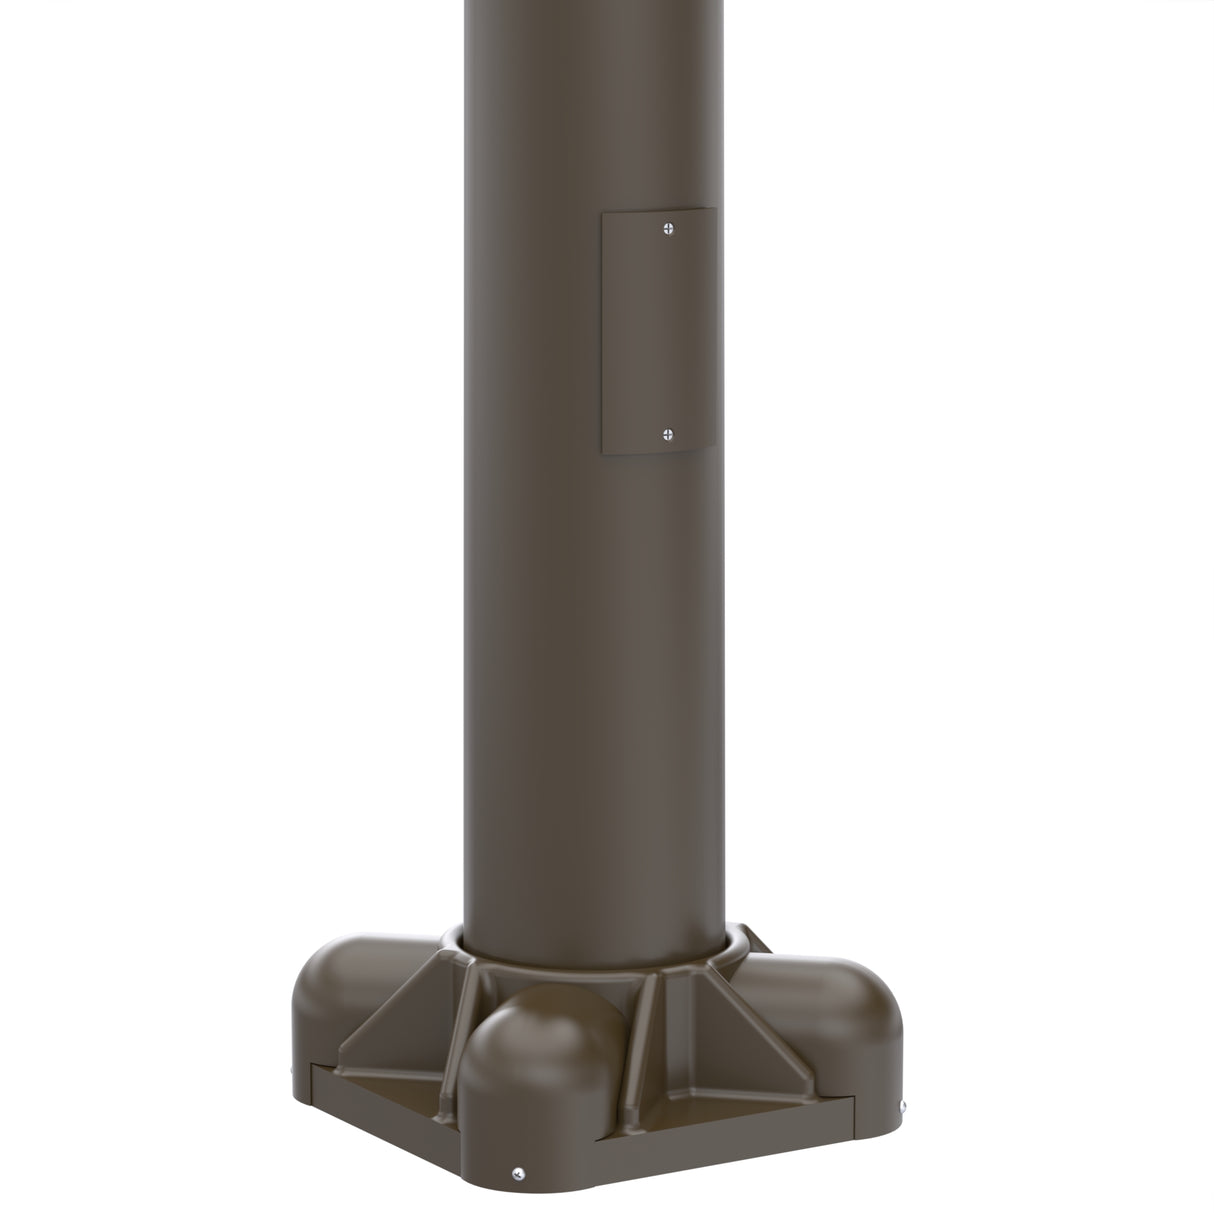 33' Tall x 10" Base OD x 6.0" Top OD x 0.188" Thick, Round Tapered Aluminum, Anchor Base Light Pole